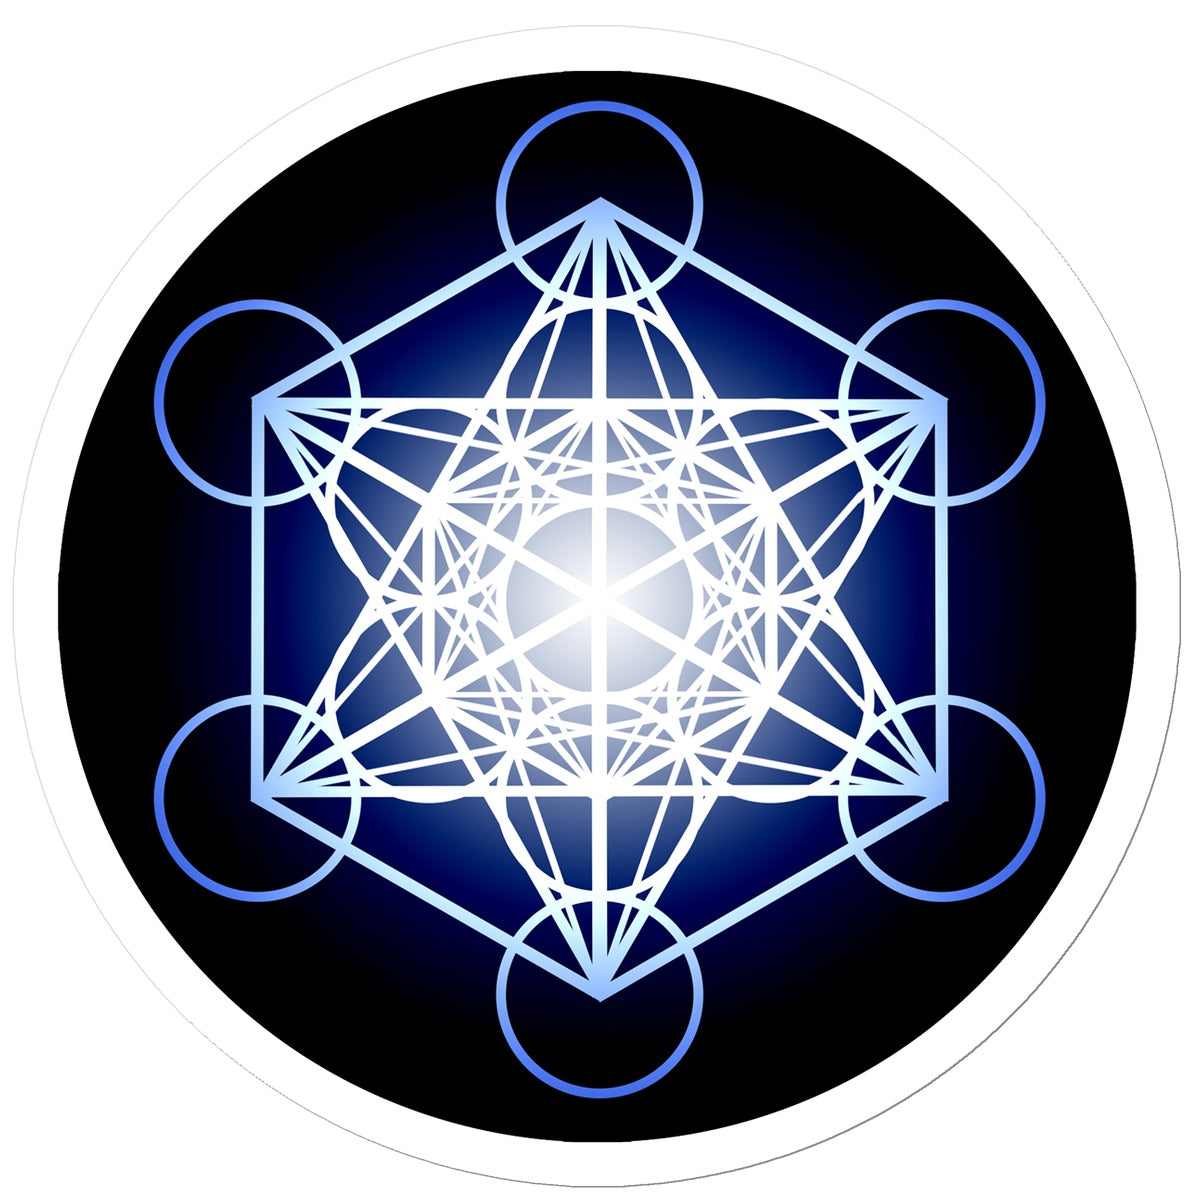 Metatron's Cube in Blue Sticker - Nature of Flowers